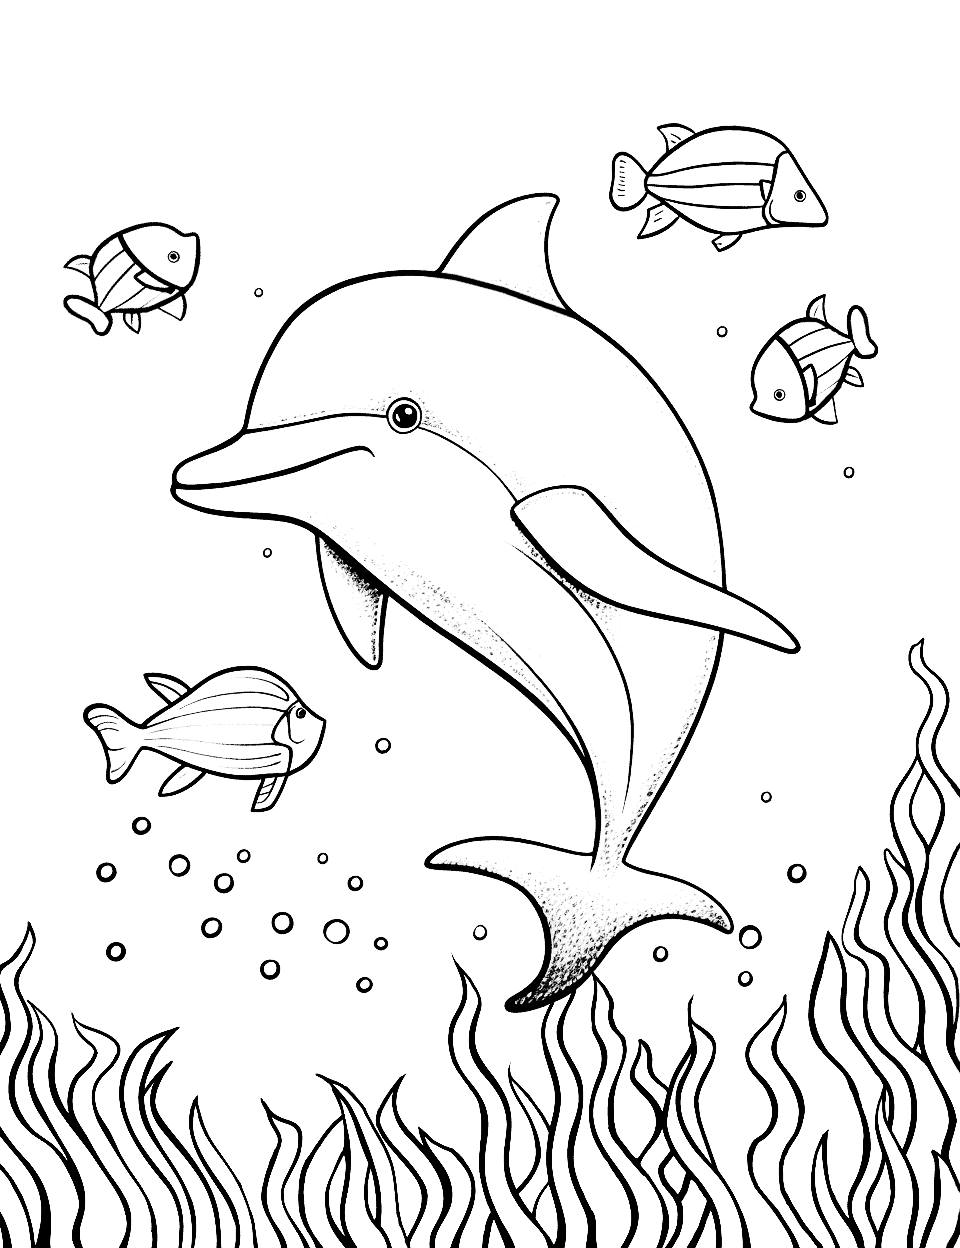 Dolphin's Fish Friends Coloring Page - A dolphin playing with its fish friends.